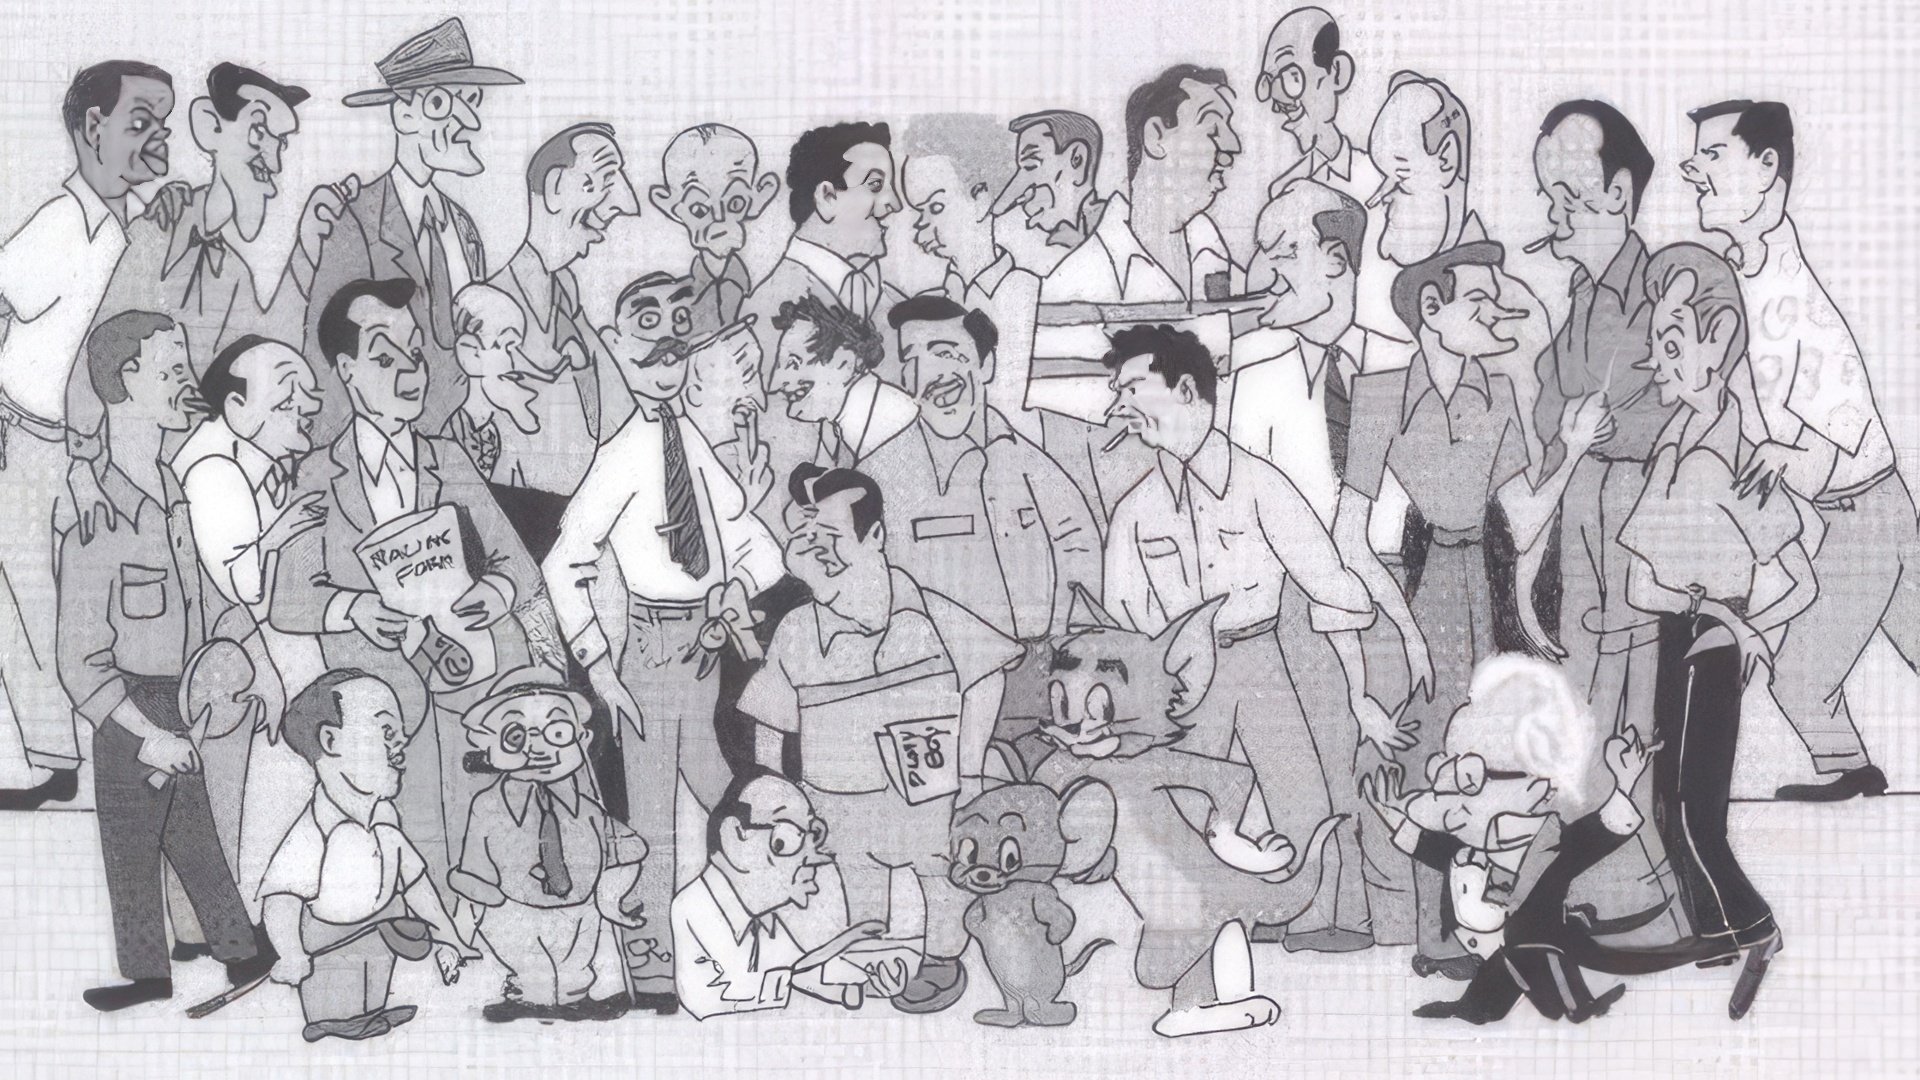 Caricature of X-B studio staff (Jack Nicholson on the right in the top row)